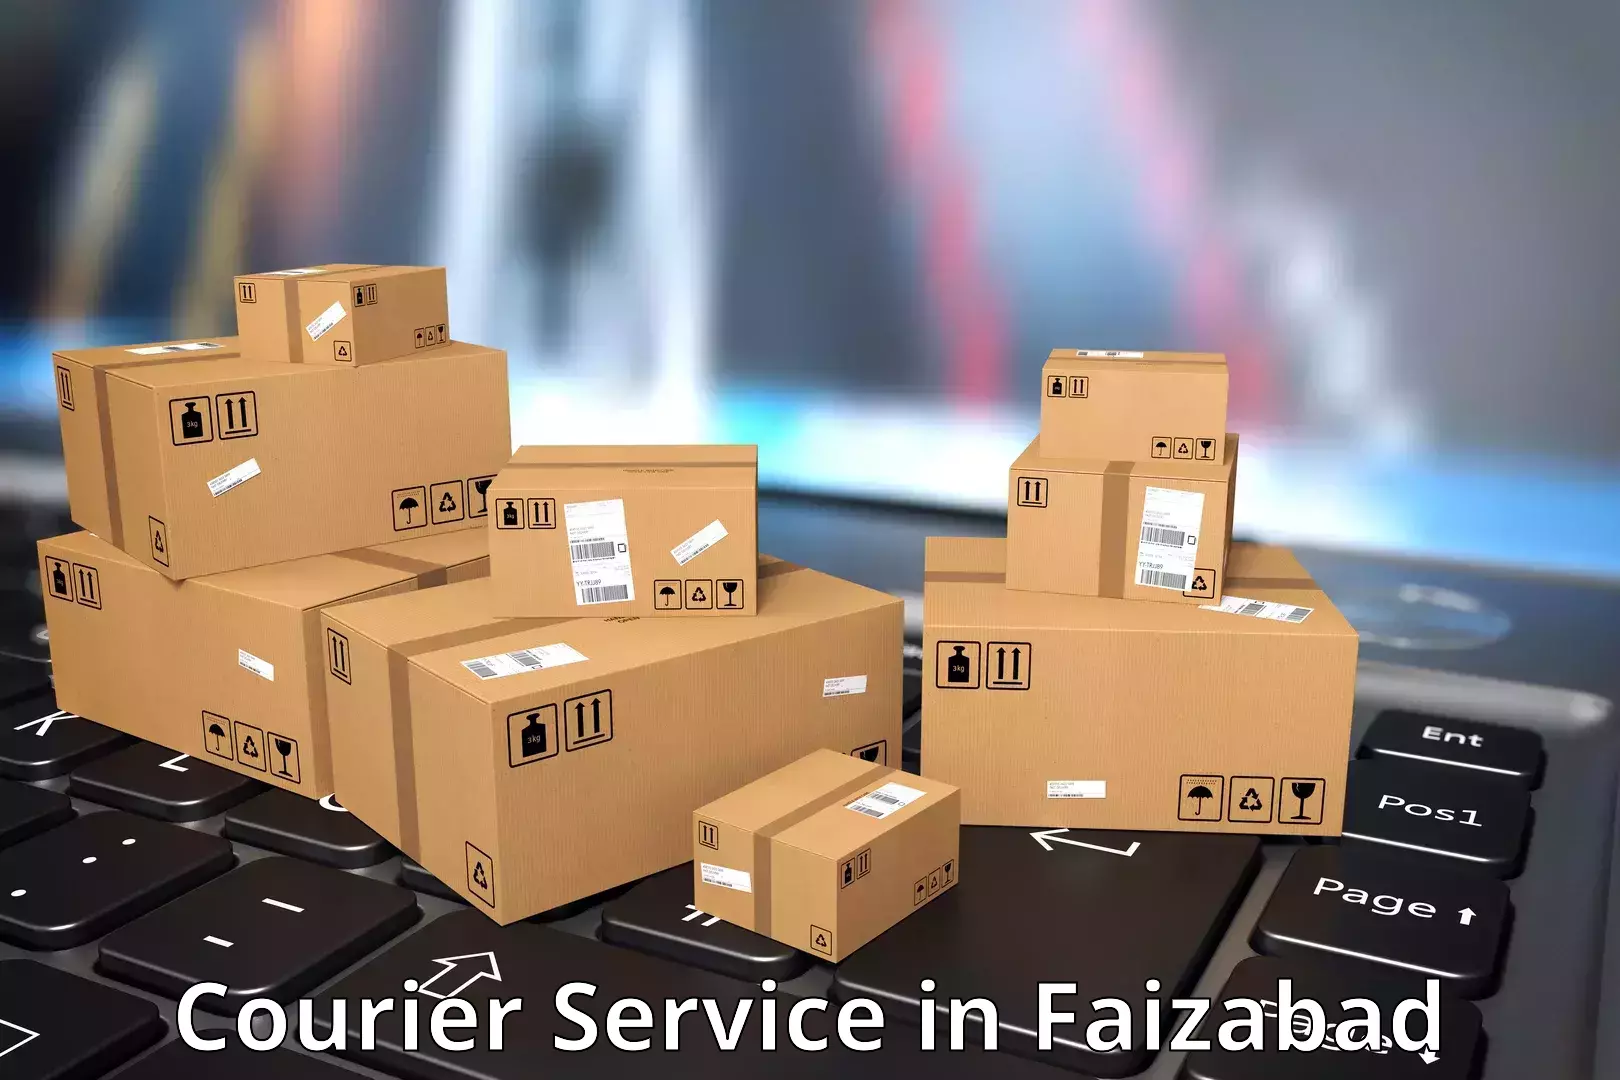 Business delivery service in Faizabad